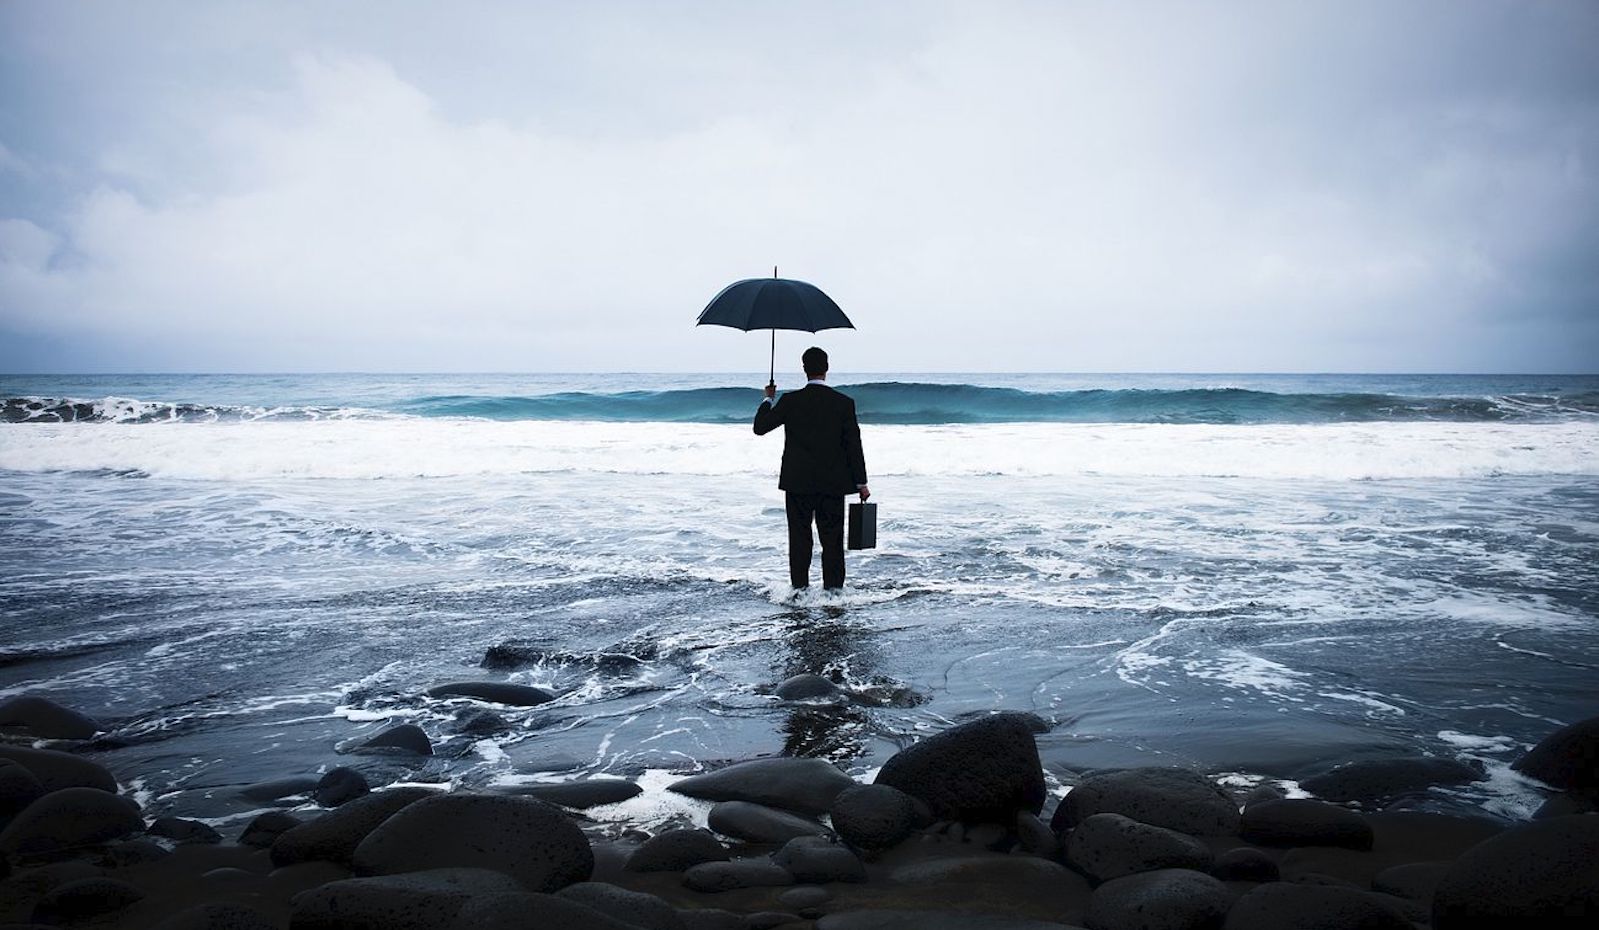 A man in a suit holding a briefcase and an umbrella standing in the ocean under a cloudy sky